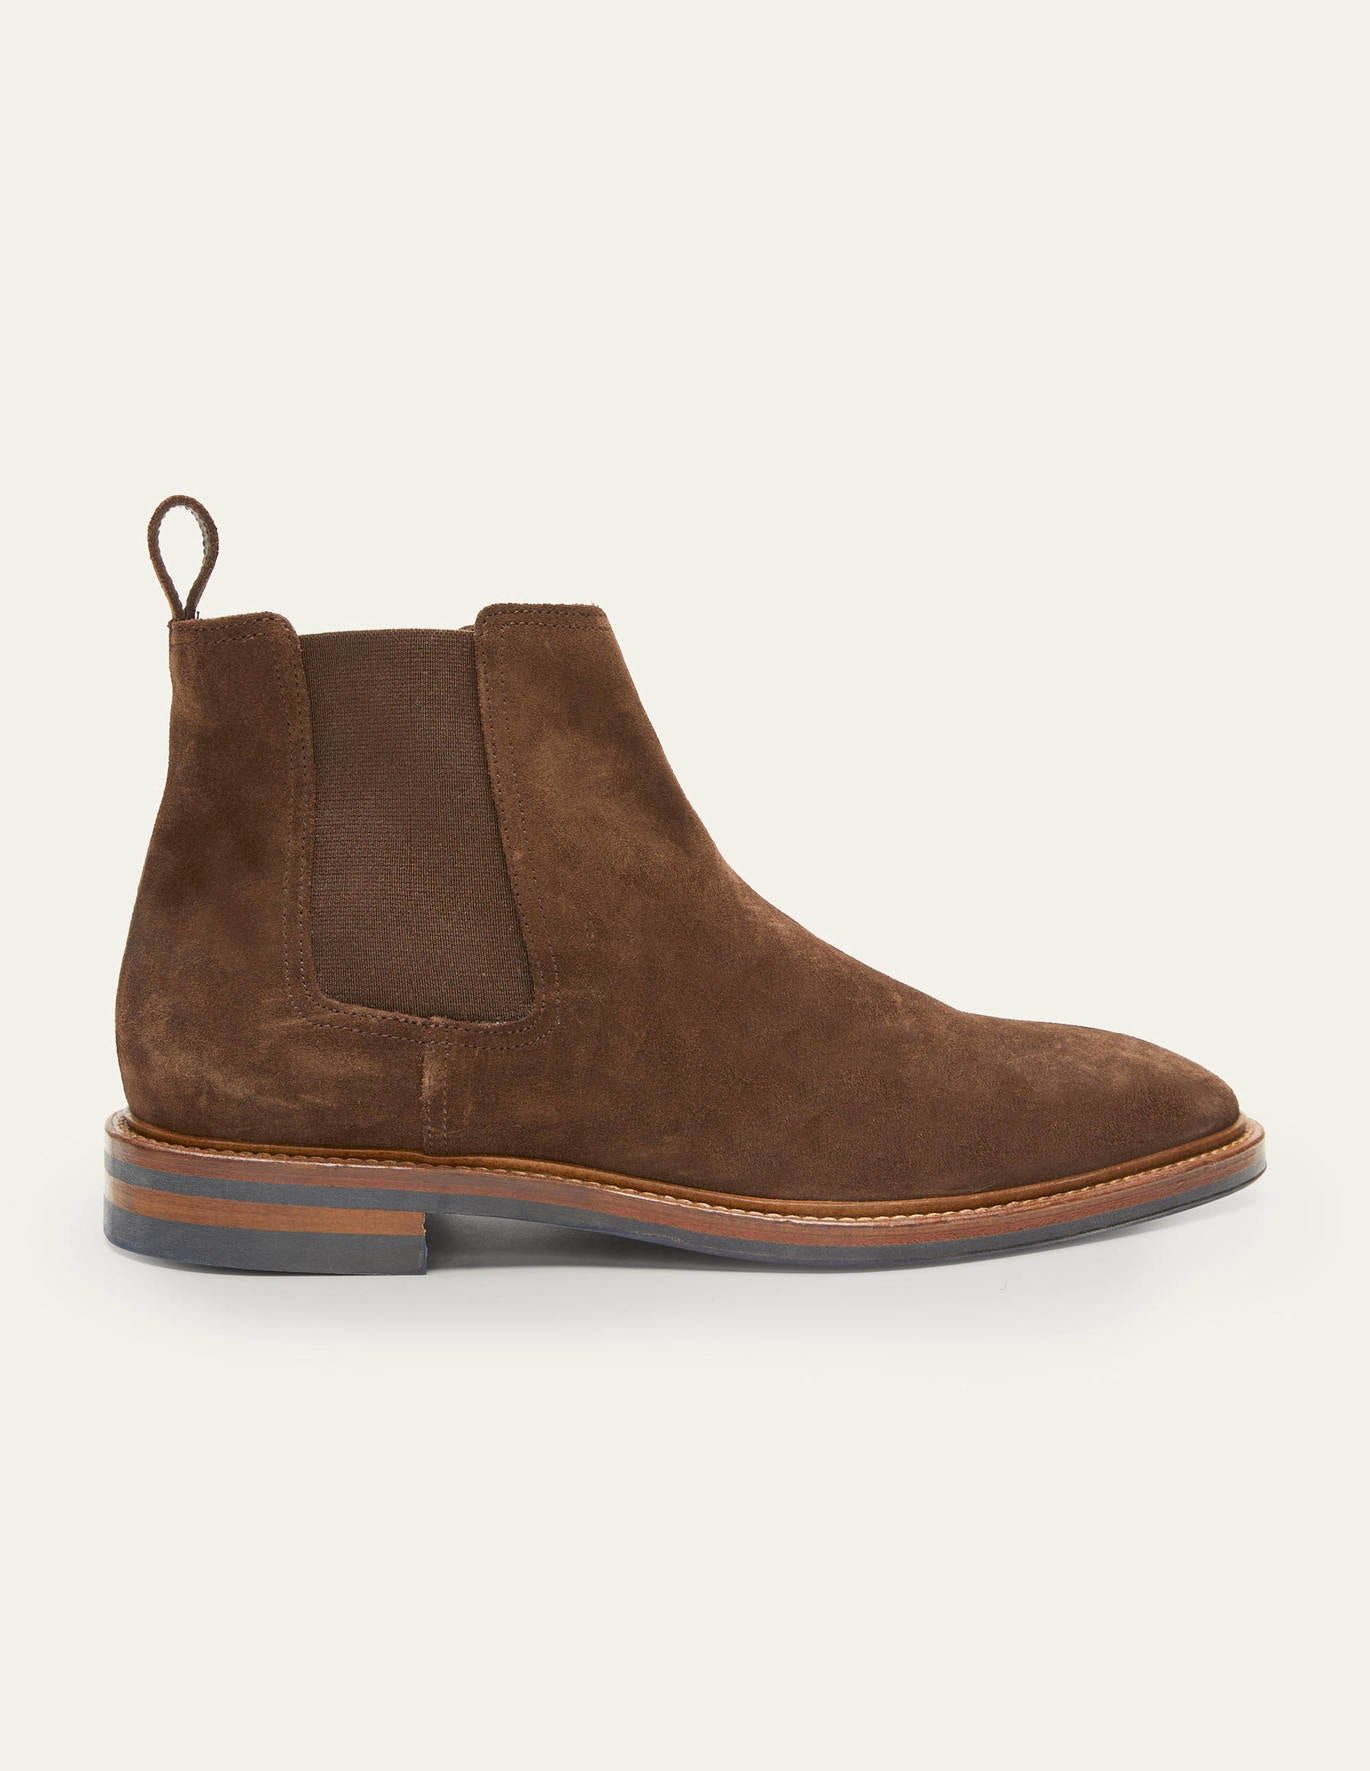 Boden Corby Chelsea Boots - Chocolate Suede